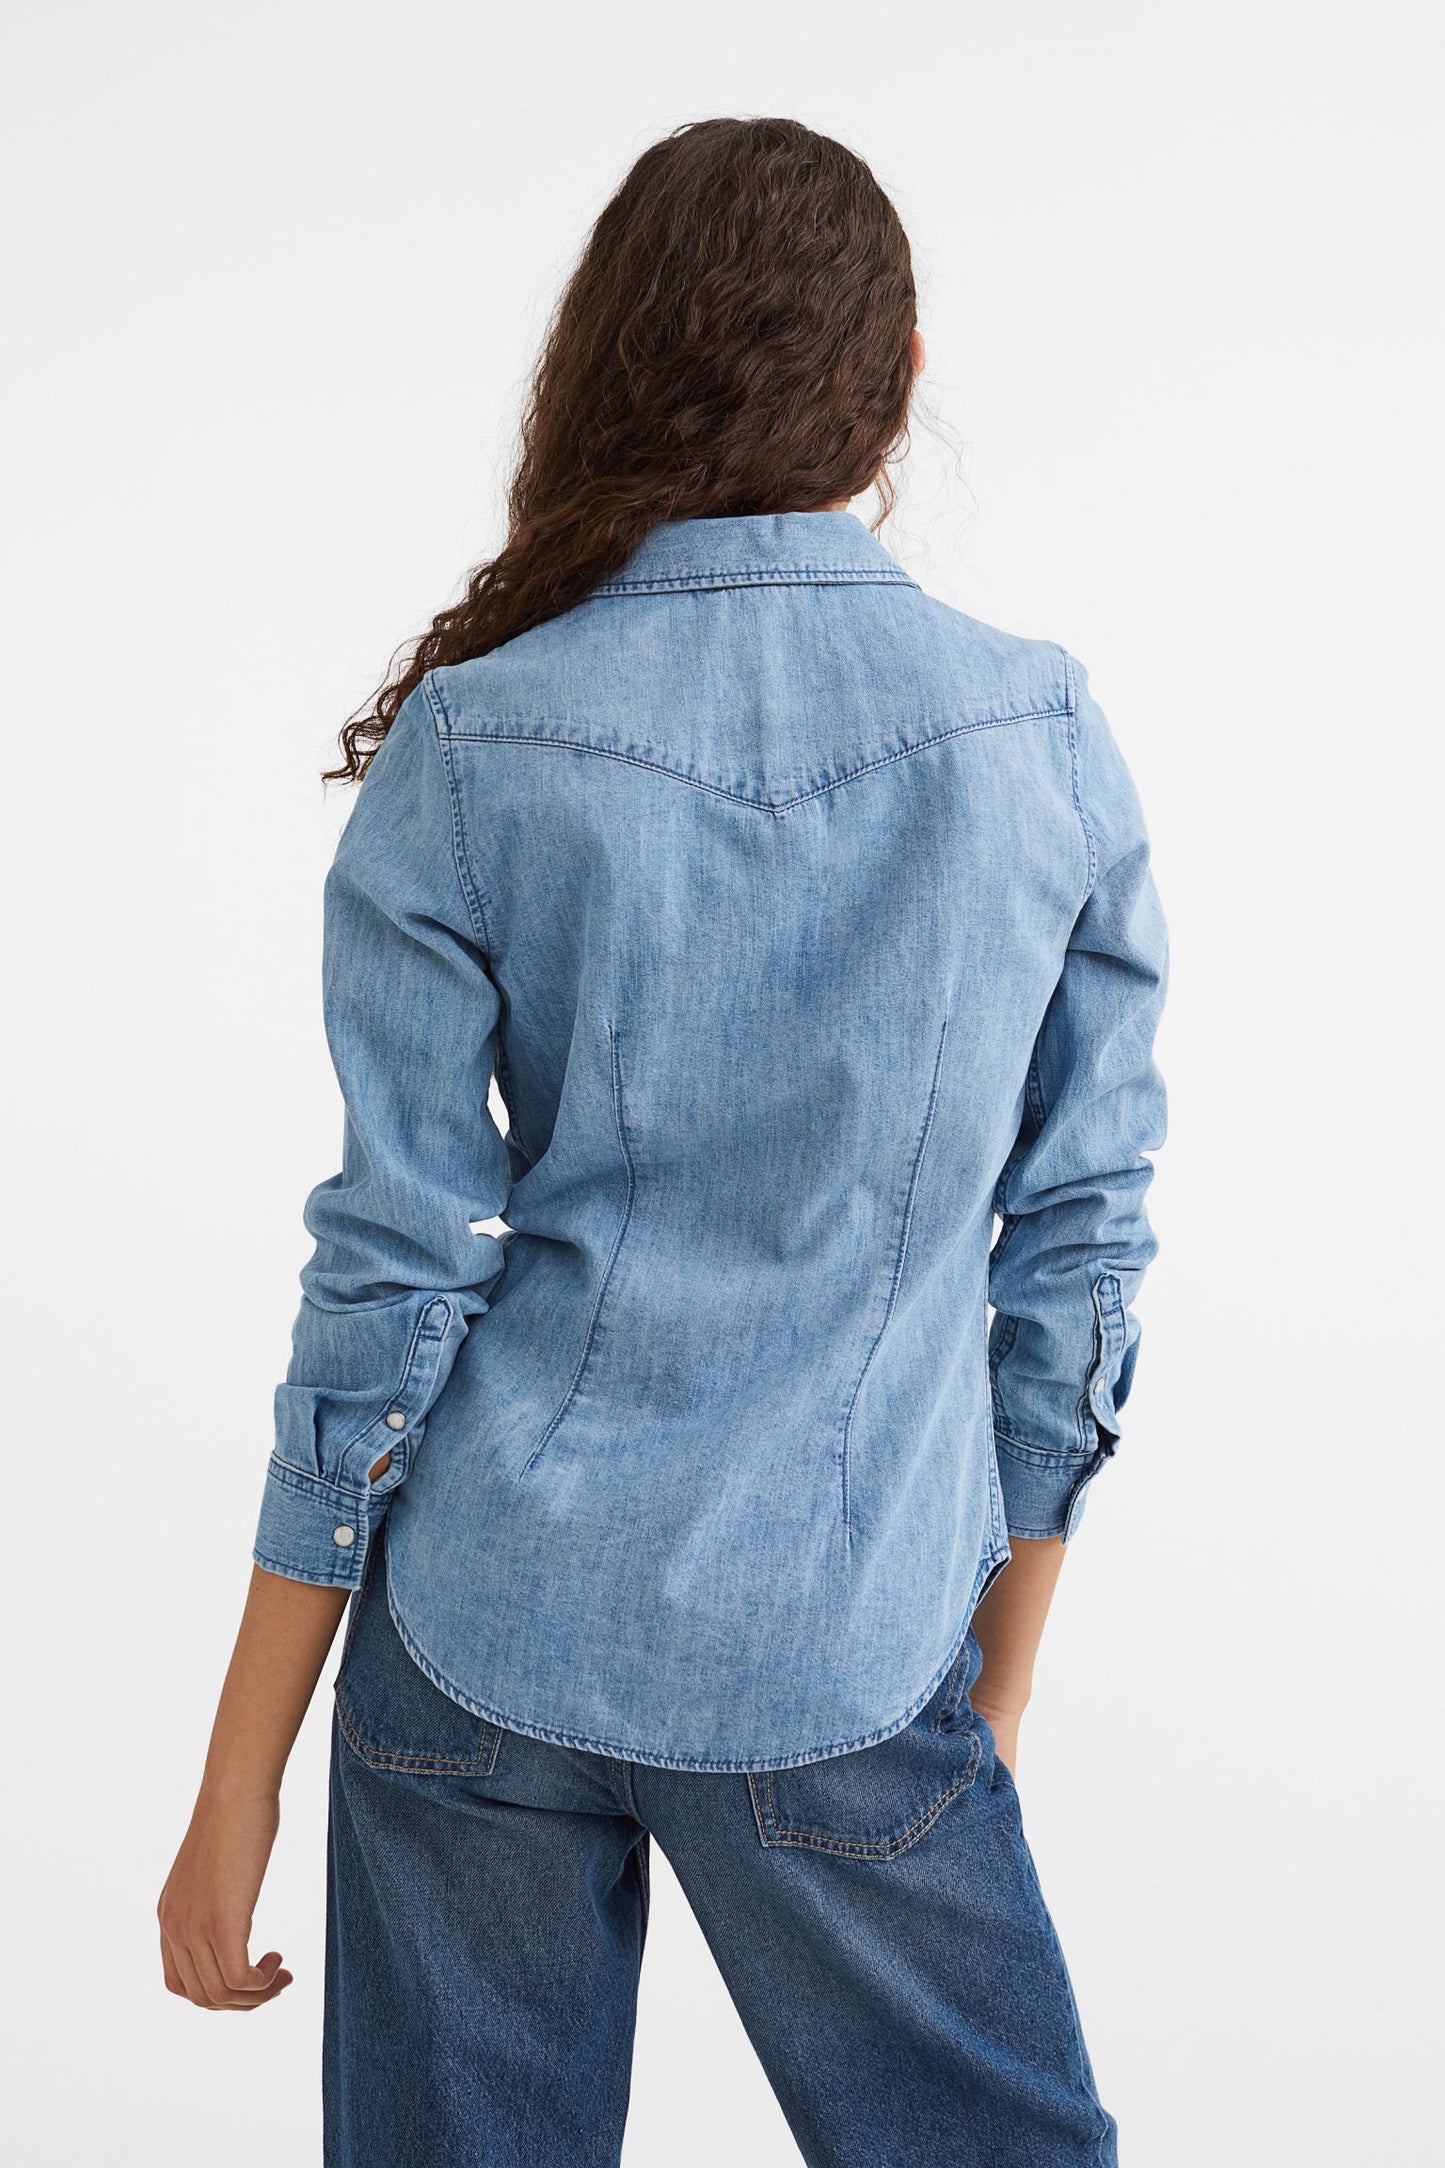 New Women Denim Shirts With Darts and a yoke at the Back, long sleeves with buttoned cuffs,